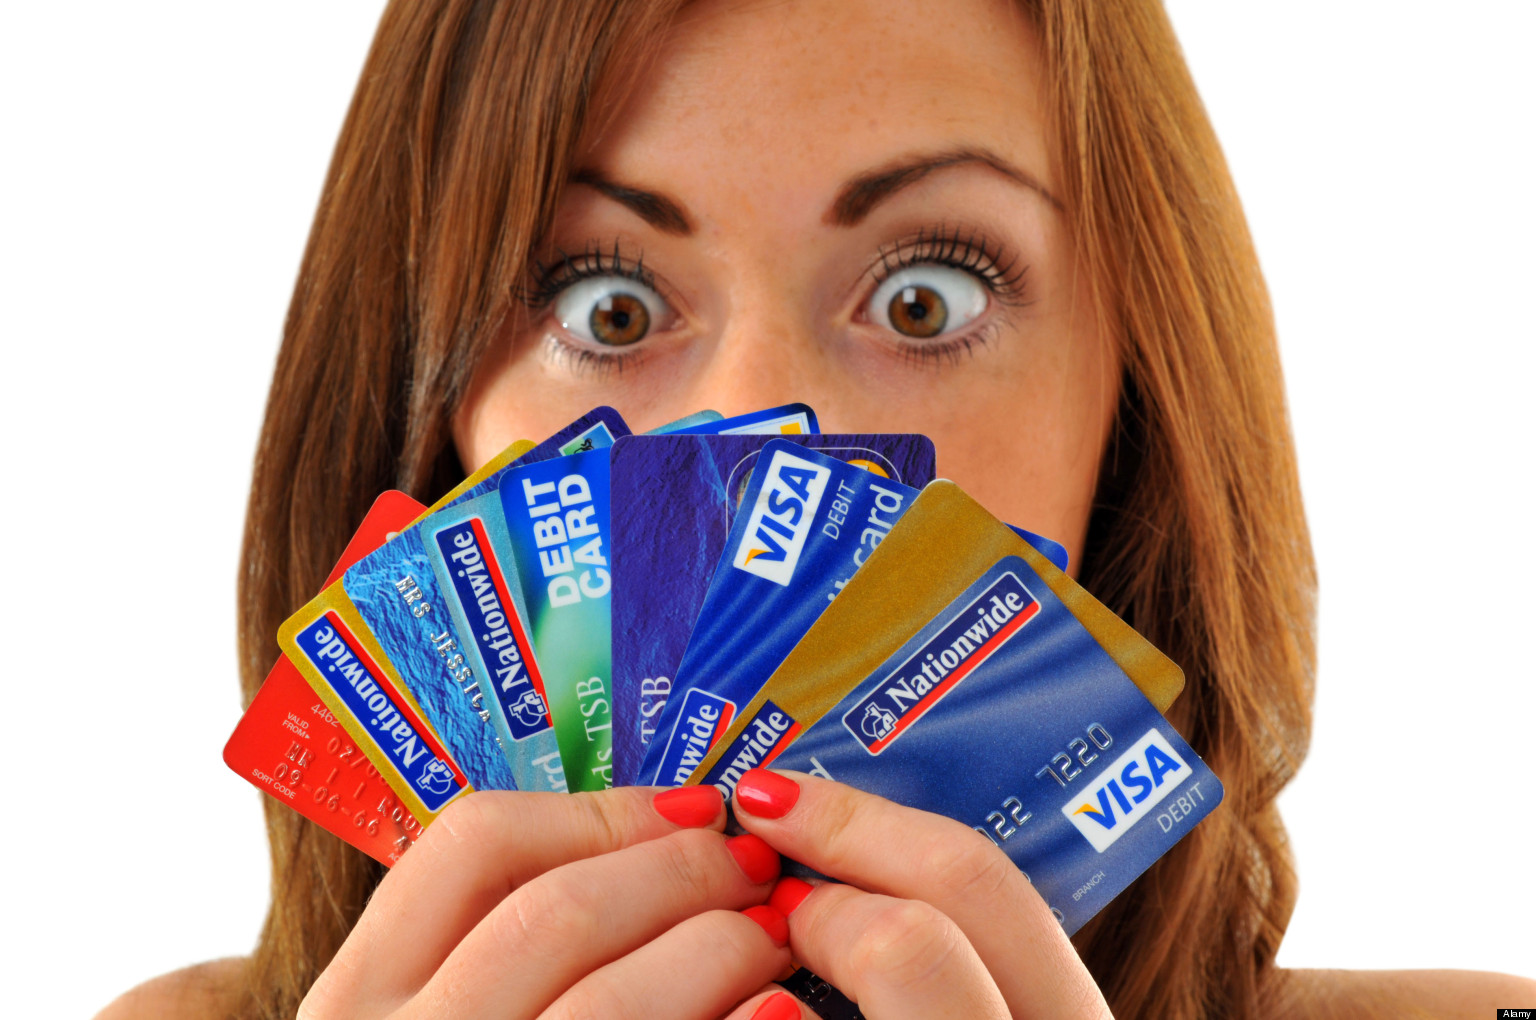 Credit cards, woman holding lots of credit and debit cards. Image shot 09/2010. Exact date unknown.